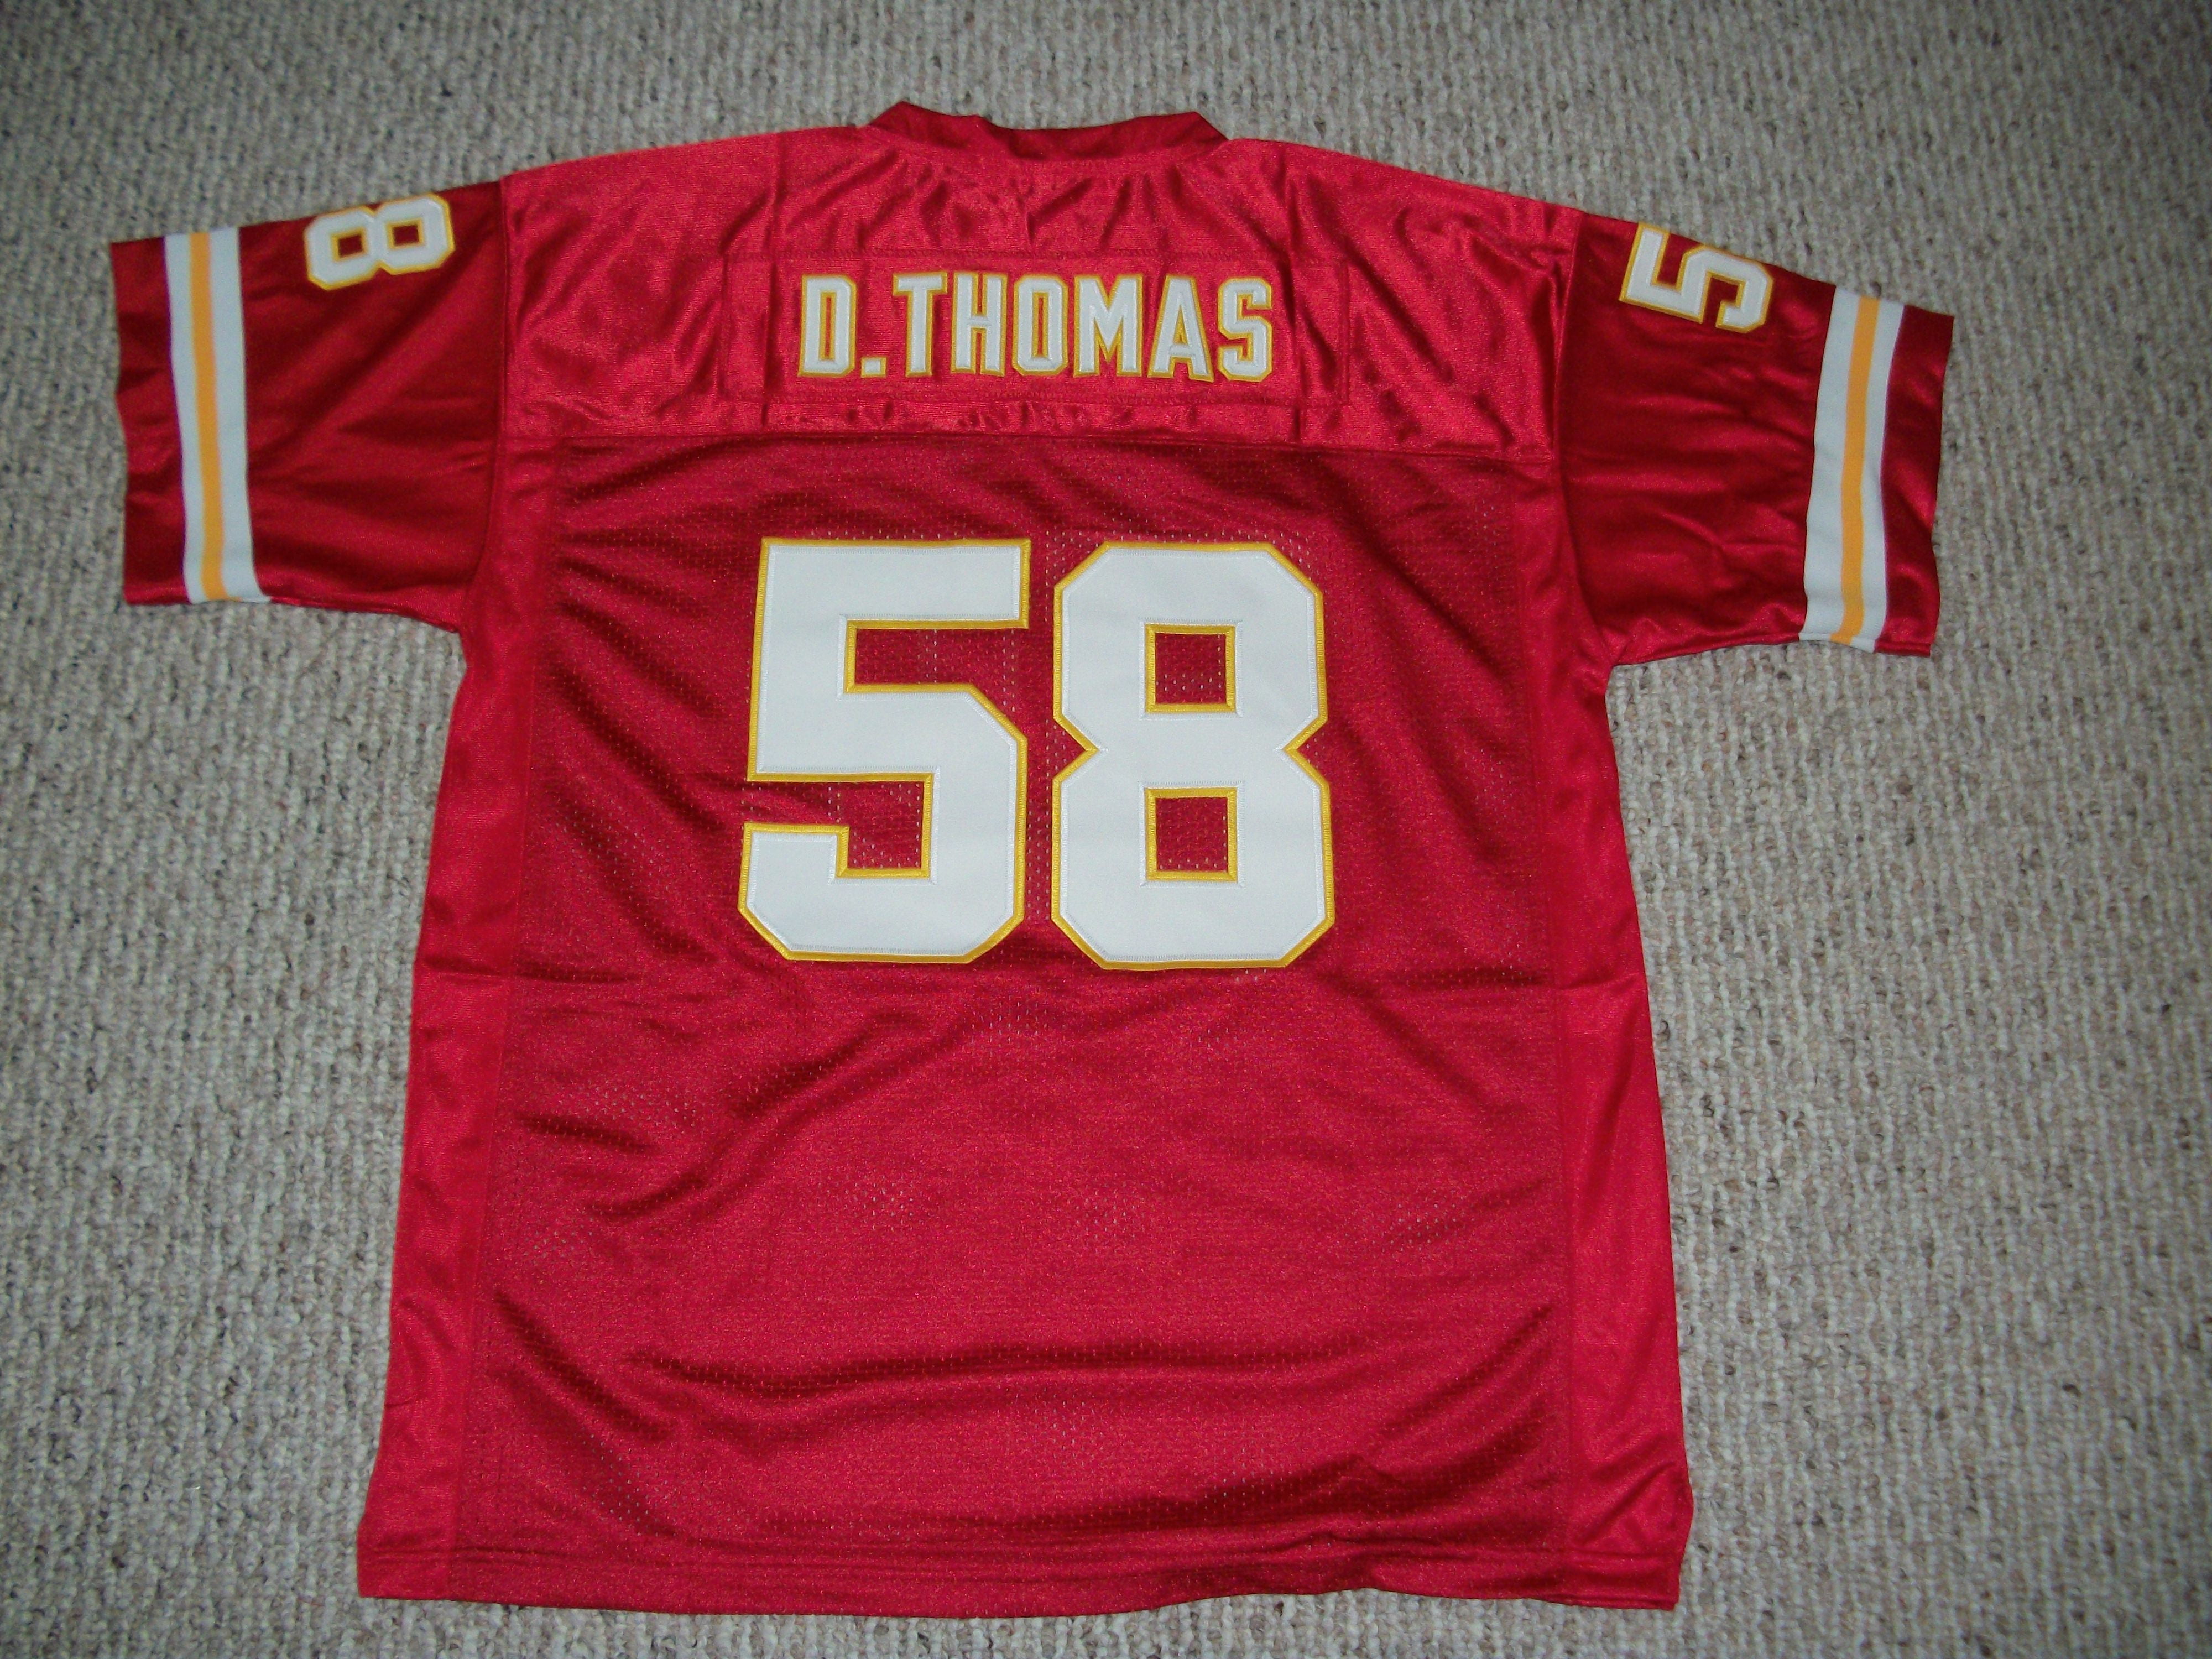 Authentic Derrick Thomas AFC Pro Bowl 1994 Jersey - Shop Mitchell & Ness  Authentic Jerseys and Replicas Mitchell & Ness Nostalgia Co.